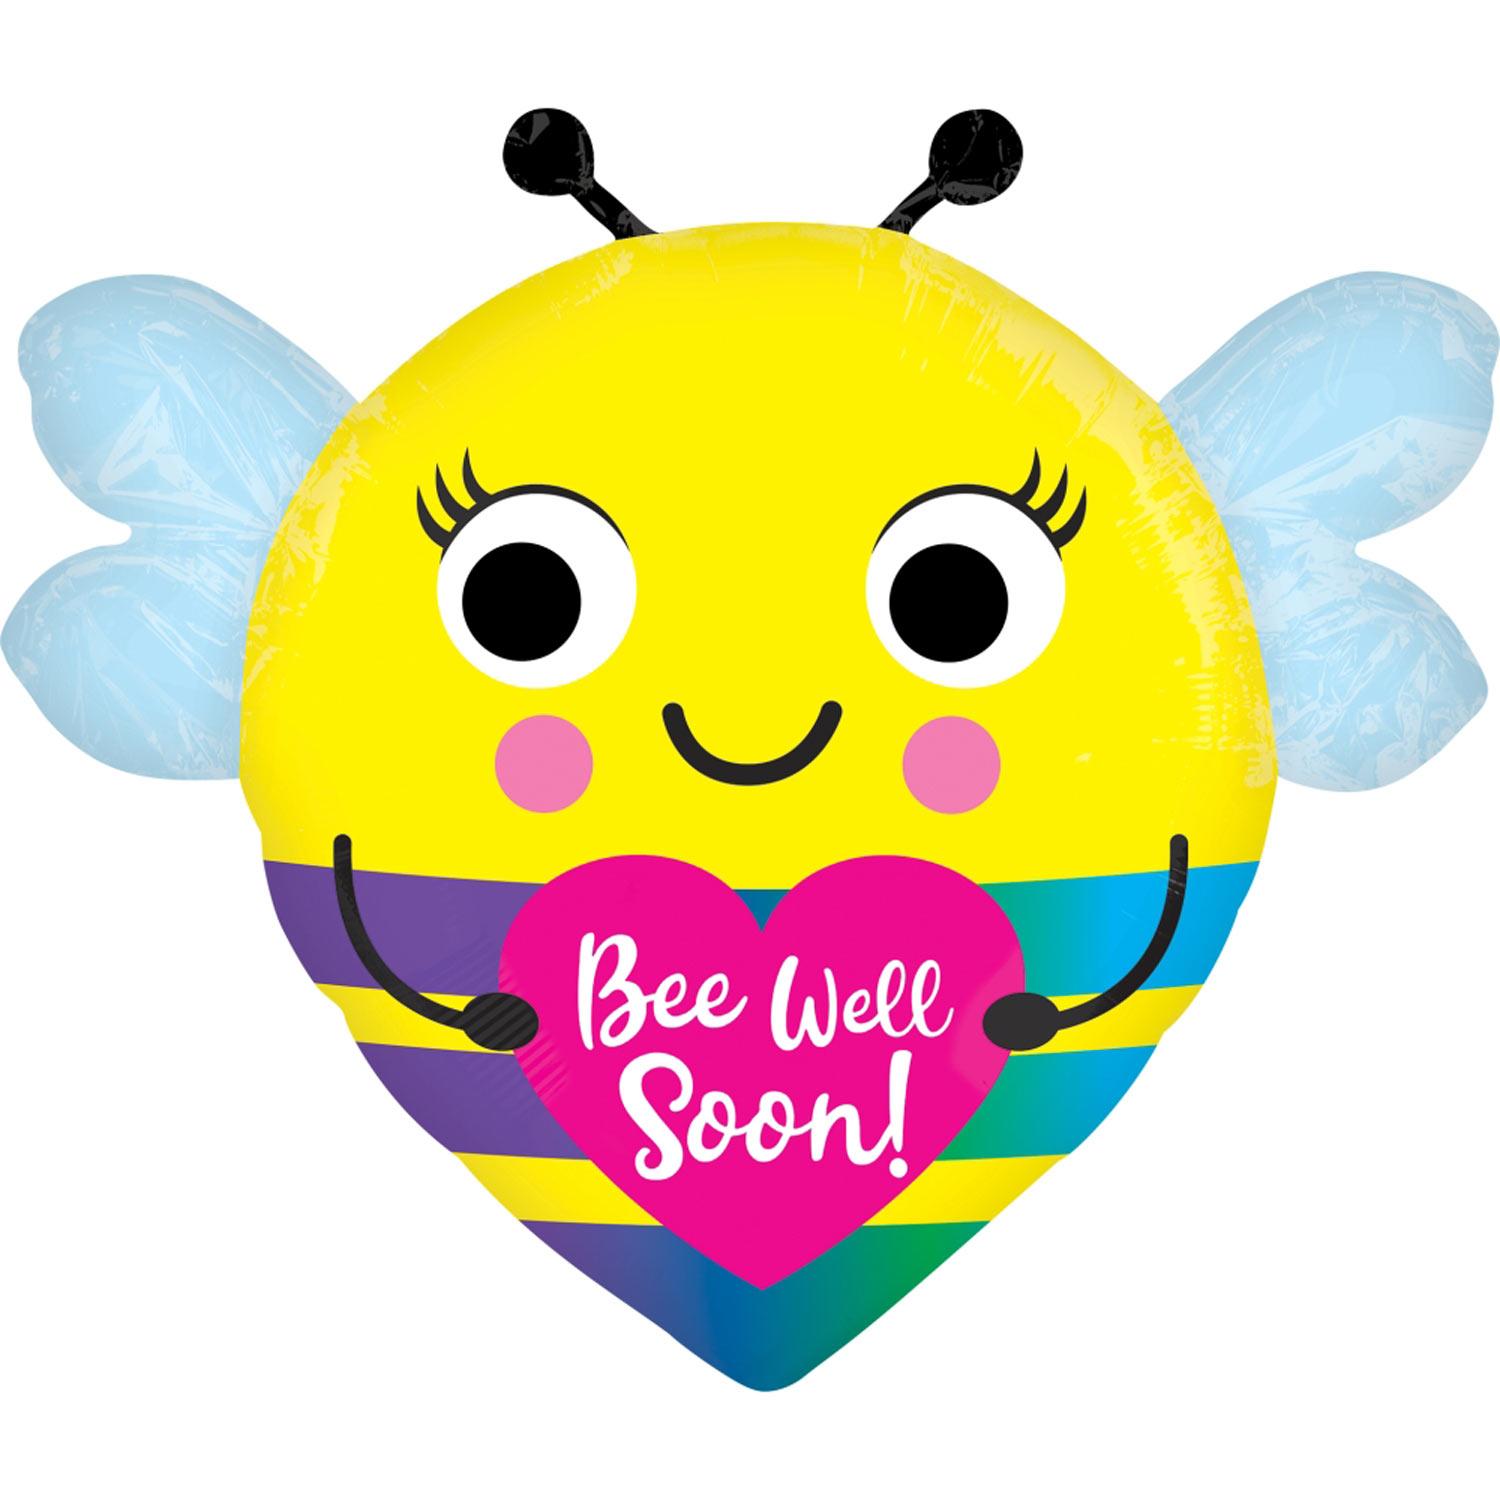 Bee Well Soon Standard Shape Foil Balloon 55x53cm Balloons & Streamers - Party Centre